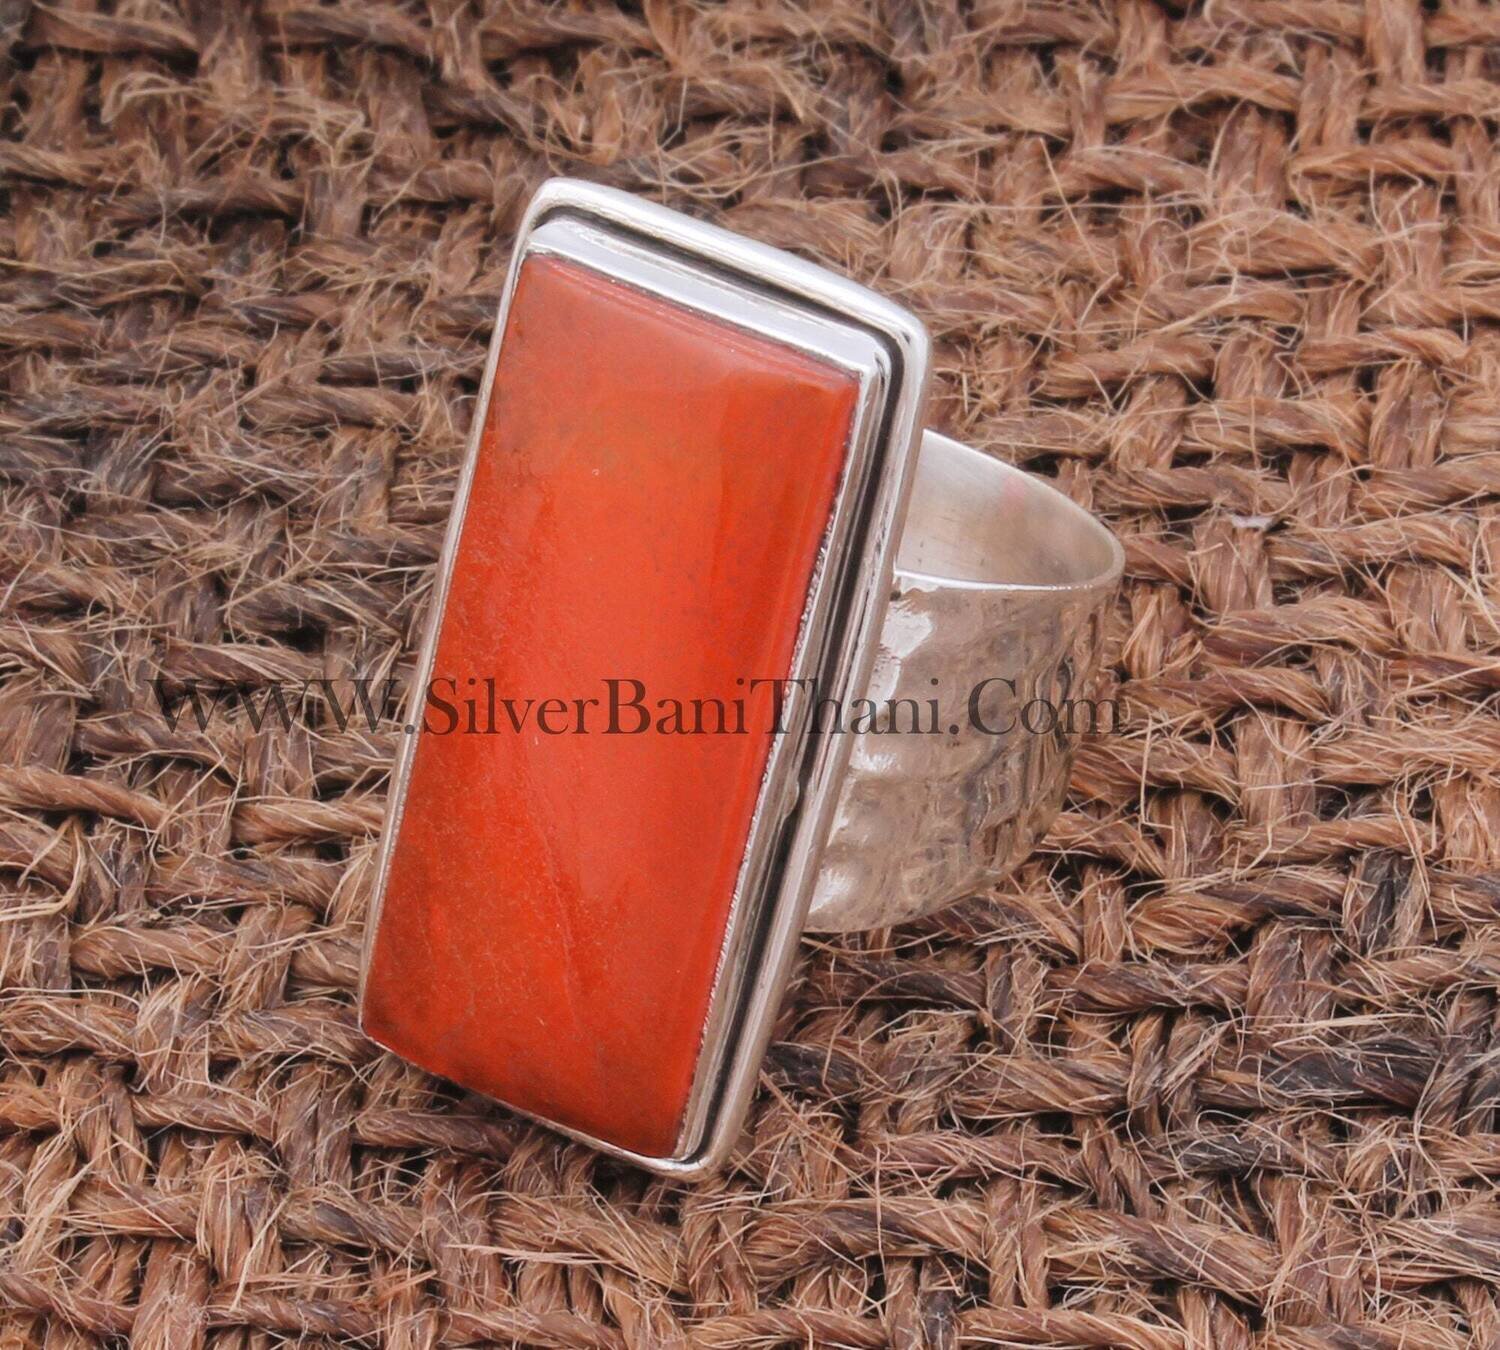 Orange Jade Long Bar Gemstone Solid 925 Sterling Silver Ring For Women, Handmade Rectangle Textured Hammered Band Ring Gift For Her Birthday